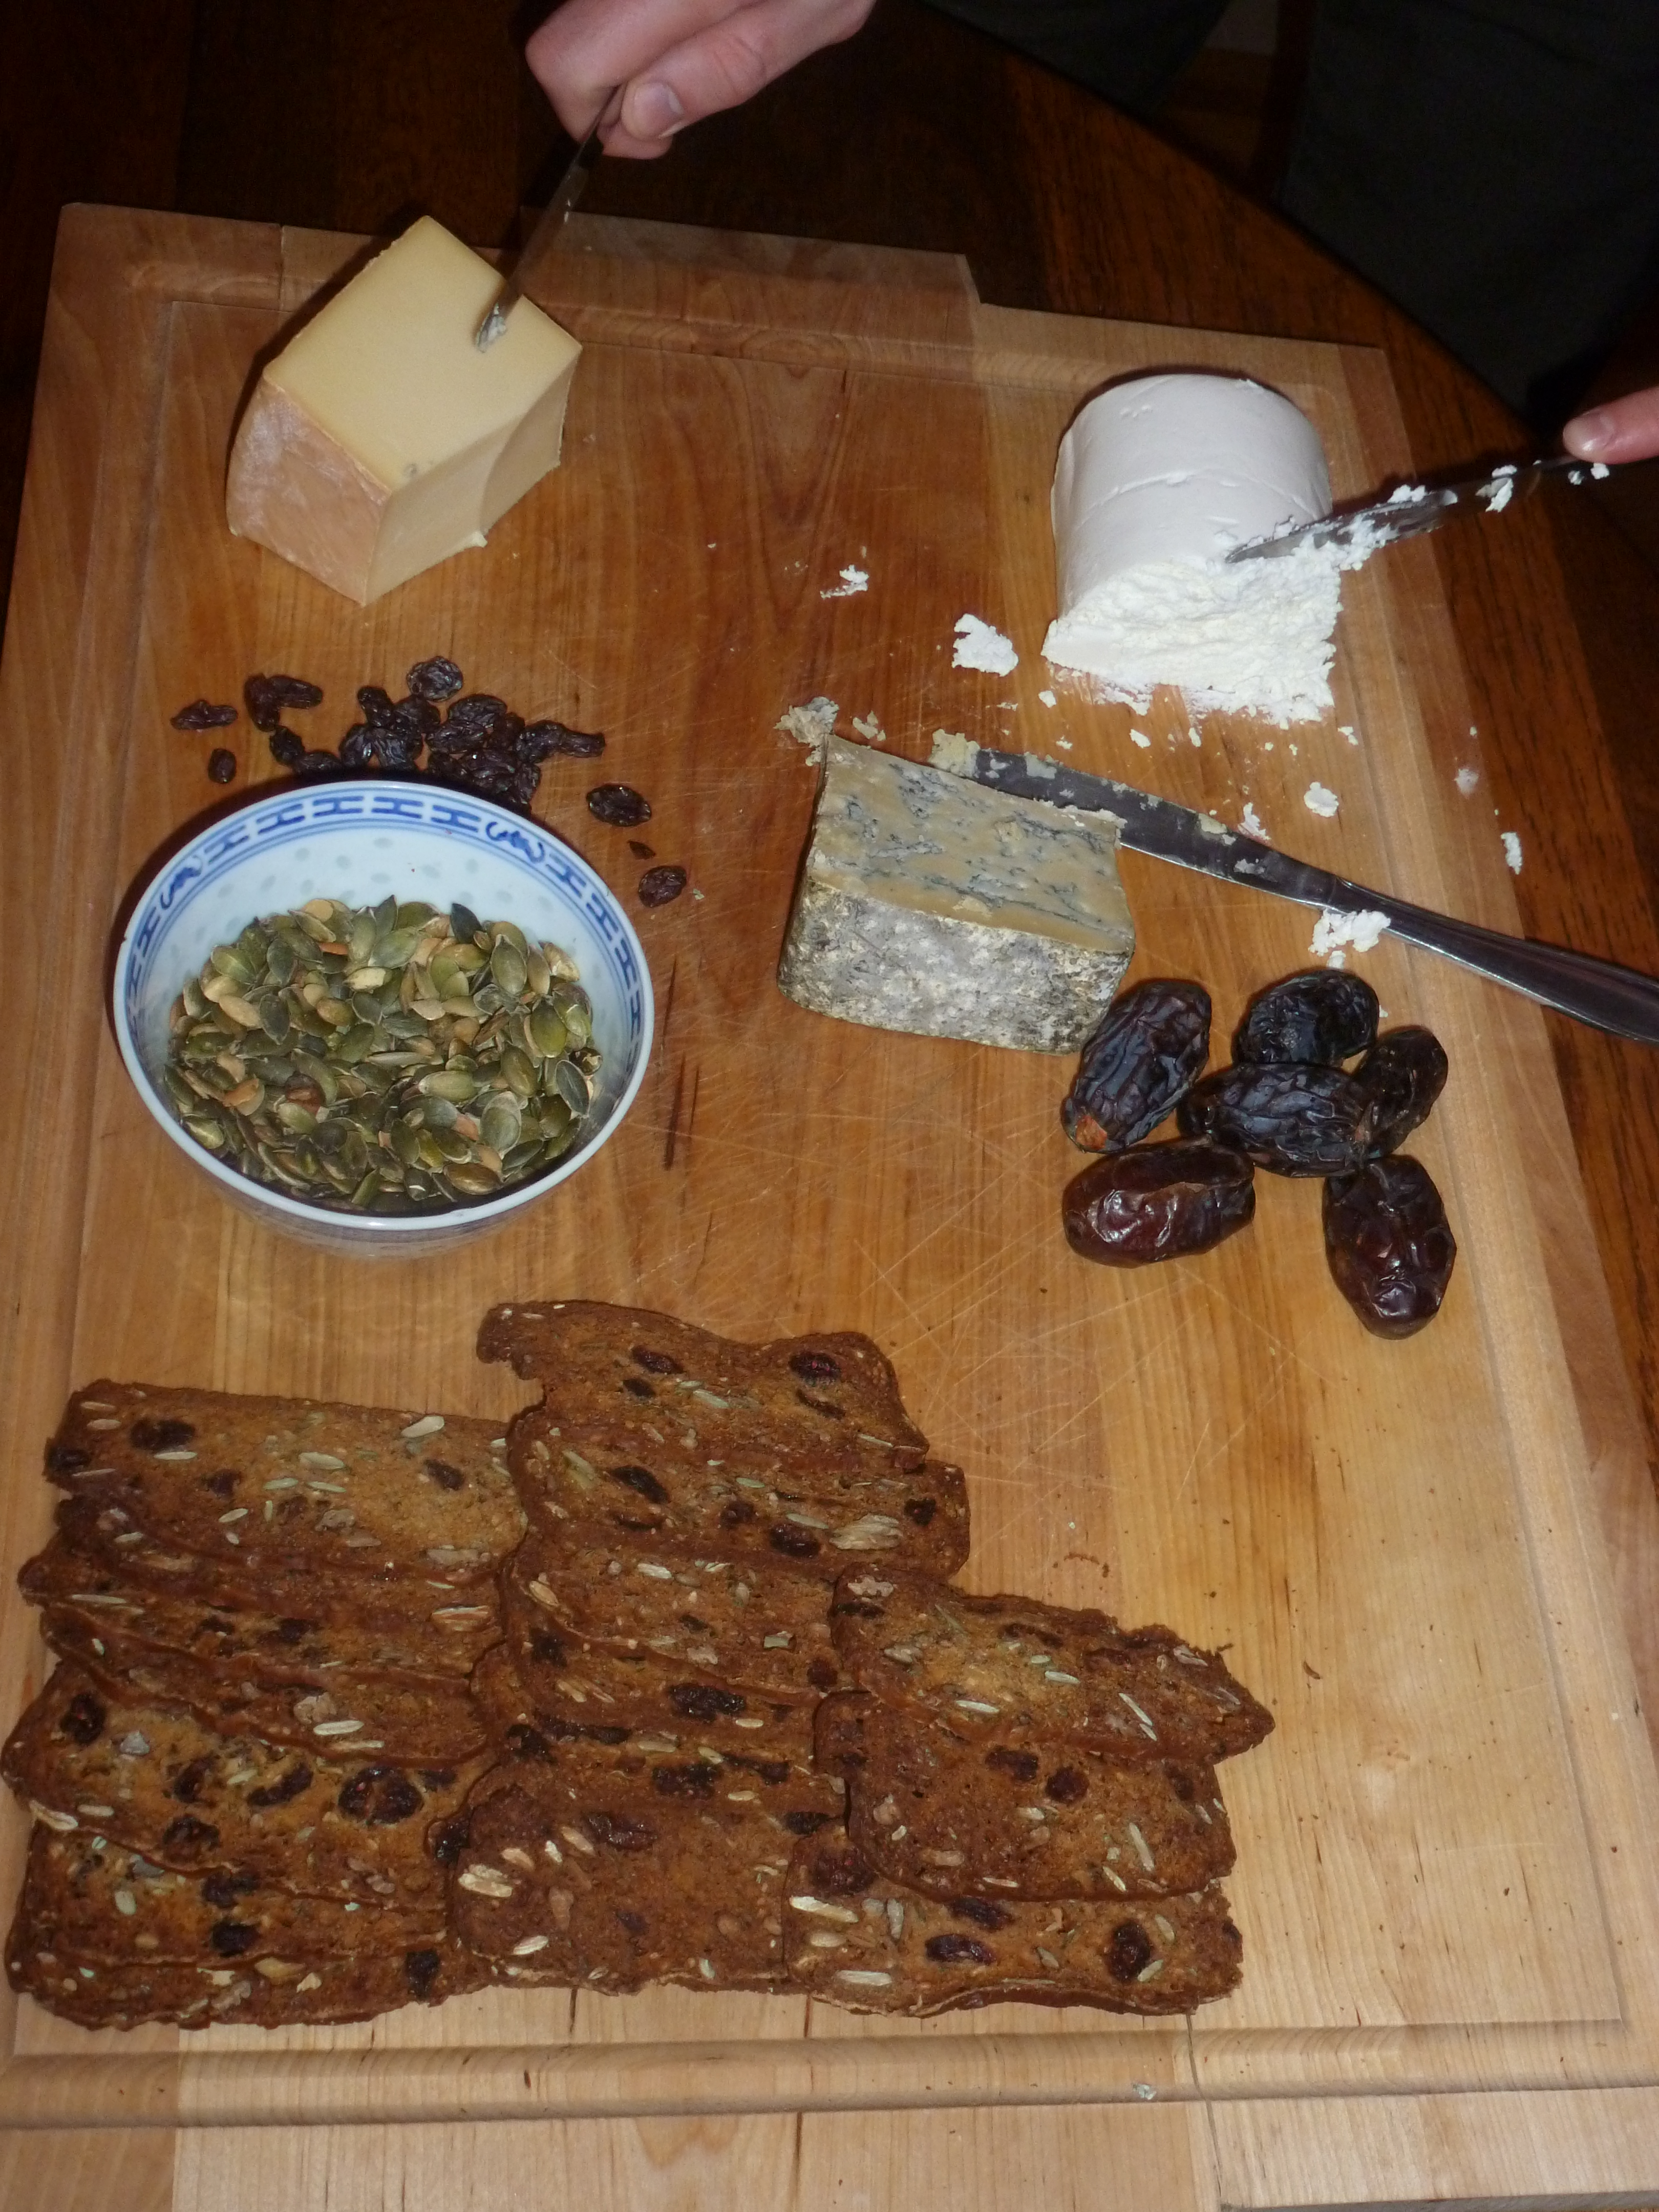 Québécois cheese and crackers